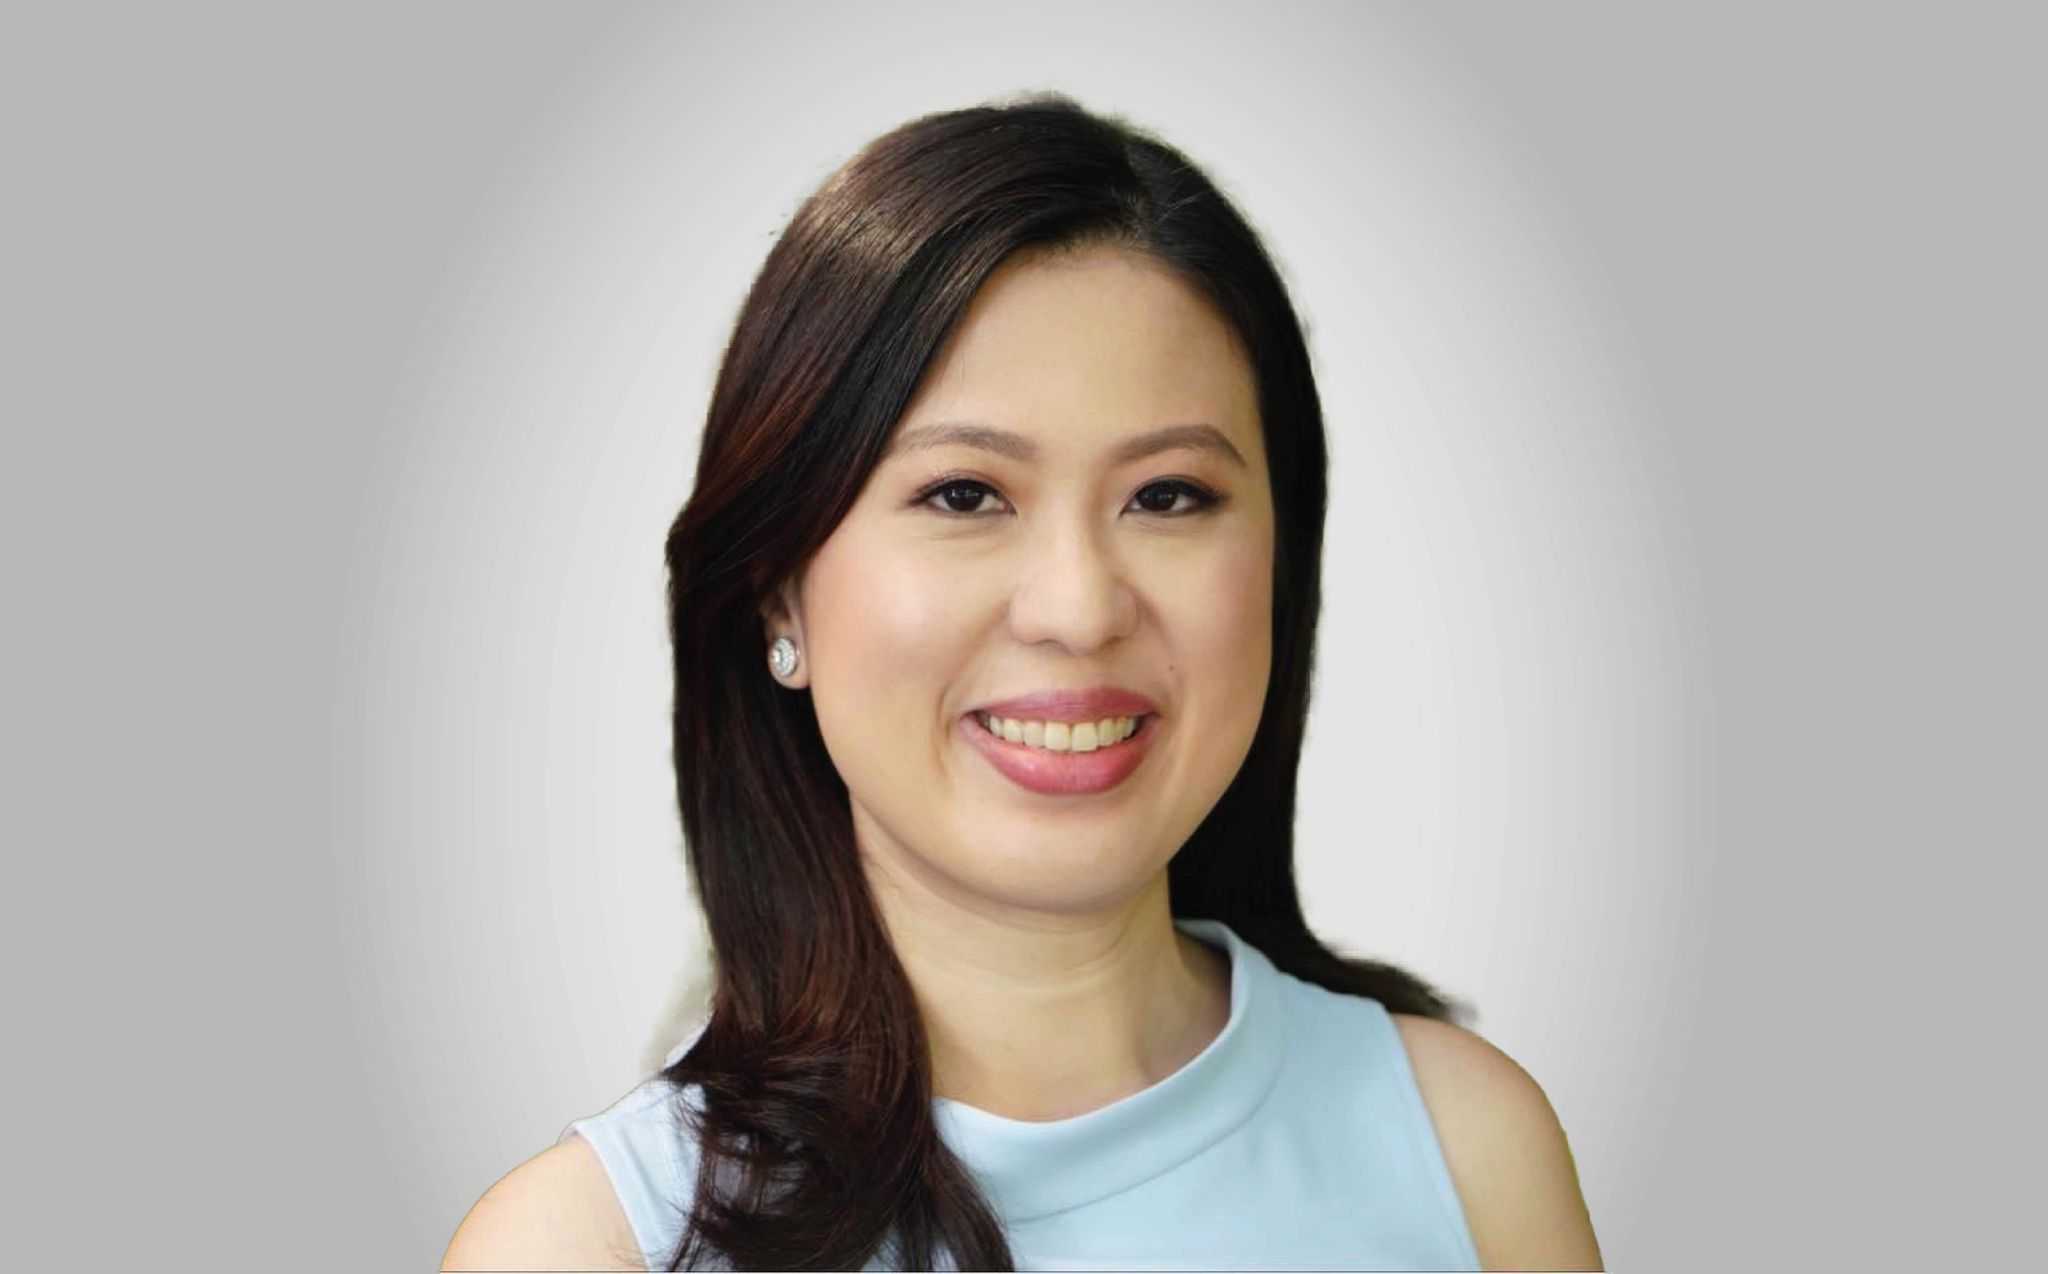 Q&A with Jollibee’s Head of Marketing Dorothy Dee-Ching on Spotting Marketing Talent